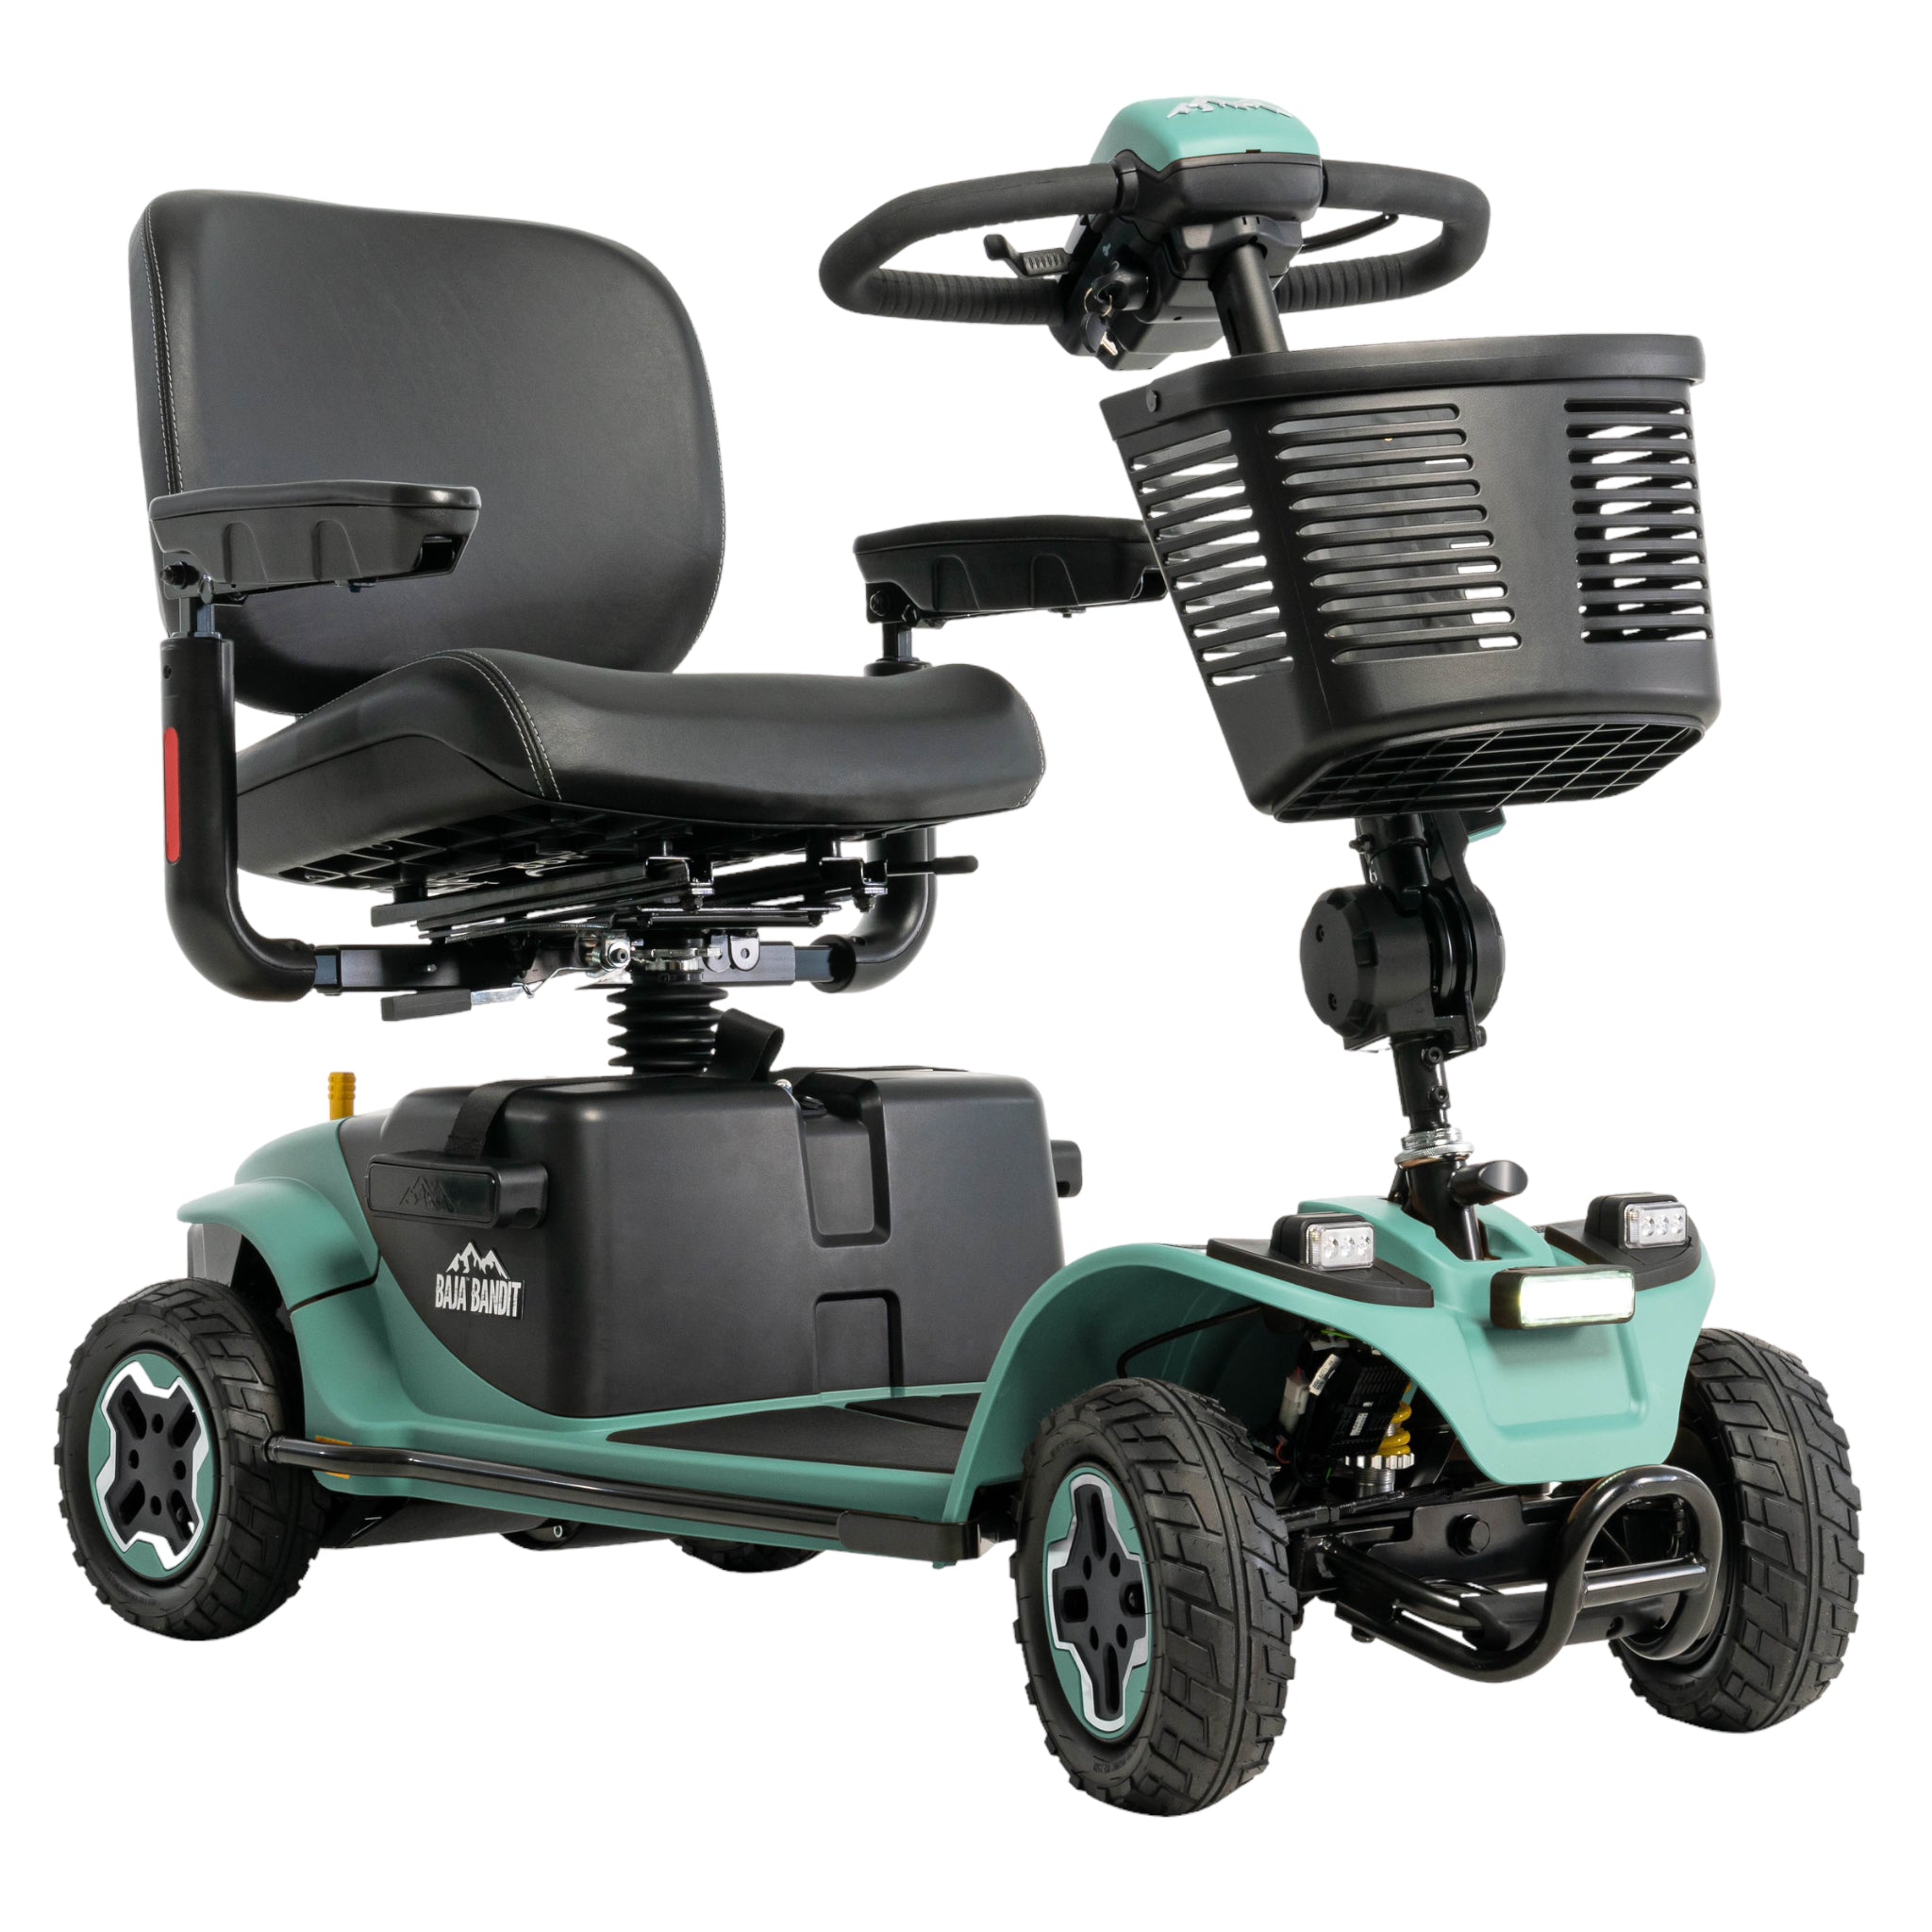 New Pride Mobility Baja Bandit Full-Size Mobility Scooter | 18 x 17 Stadium Seat | 400 LB Weight Capacity